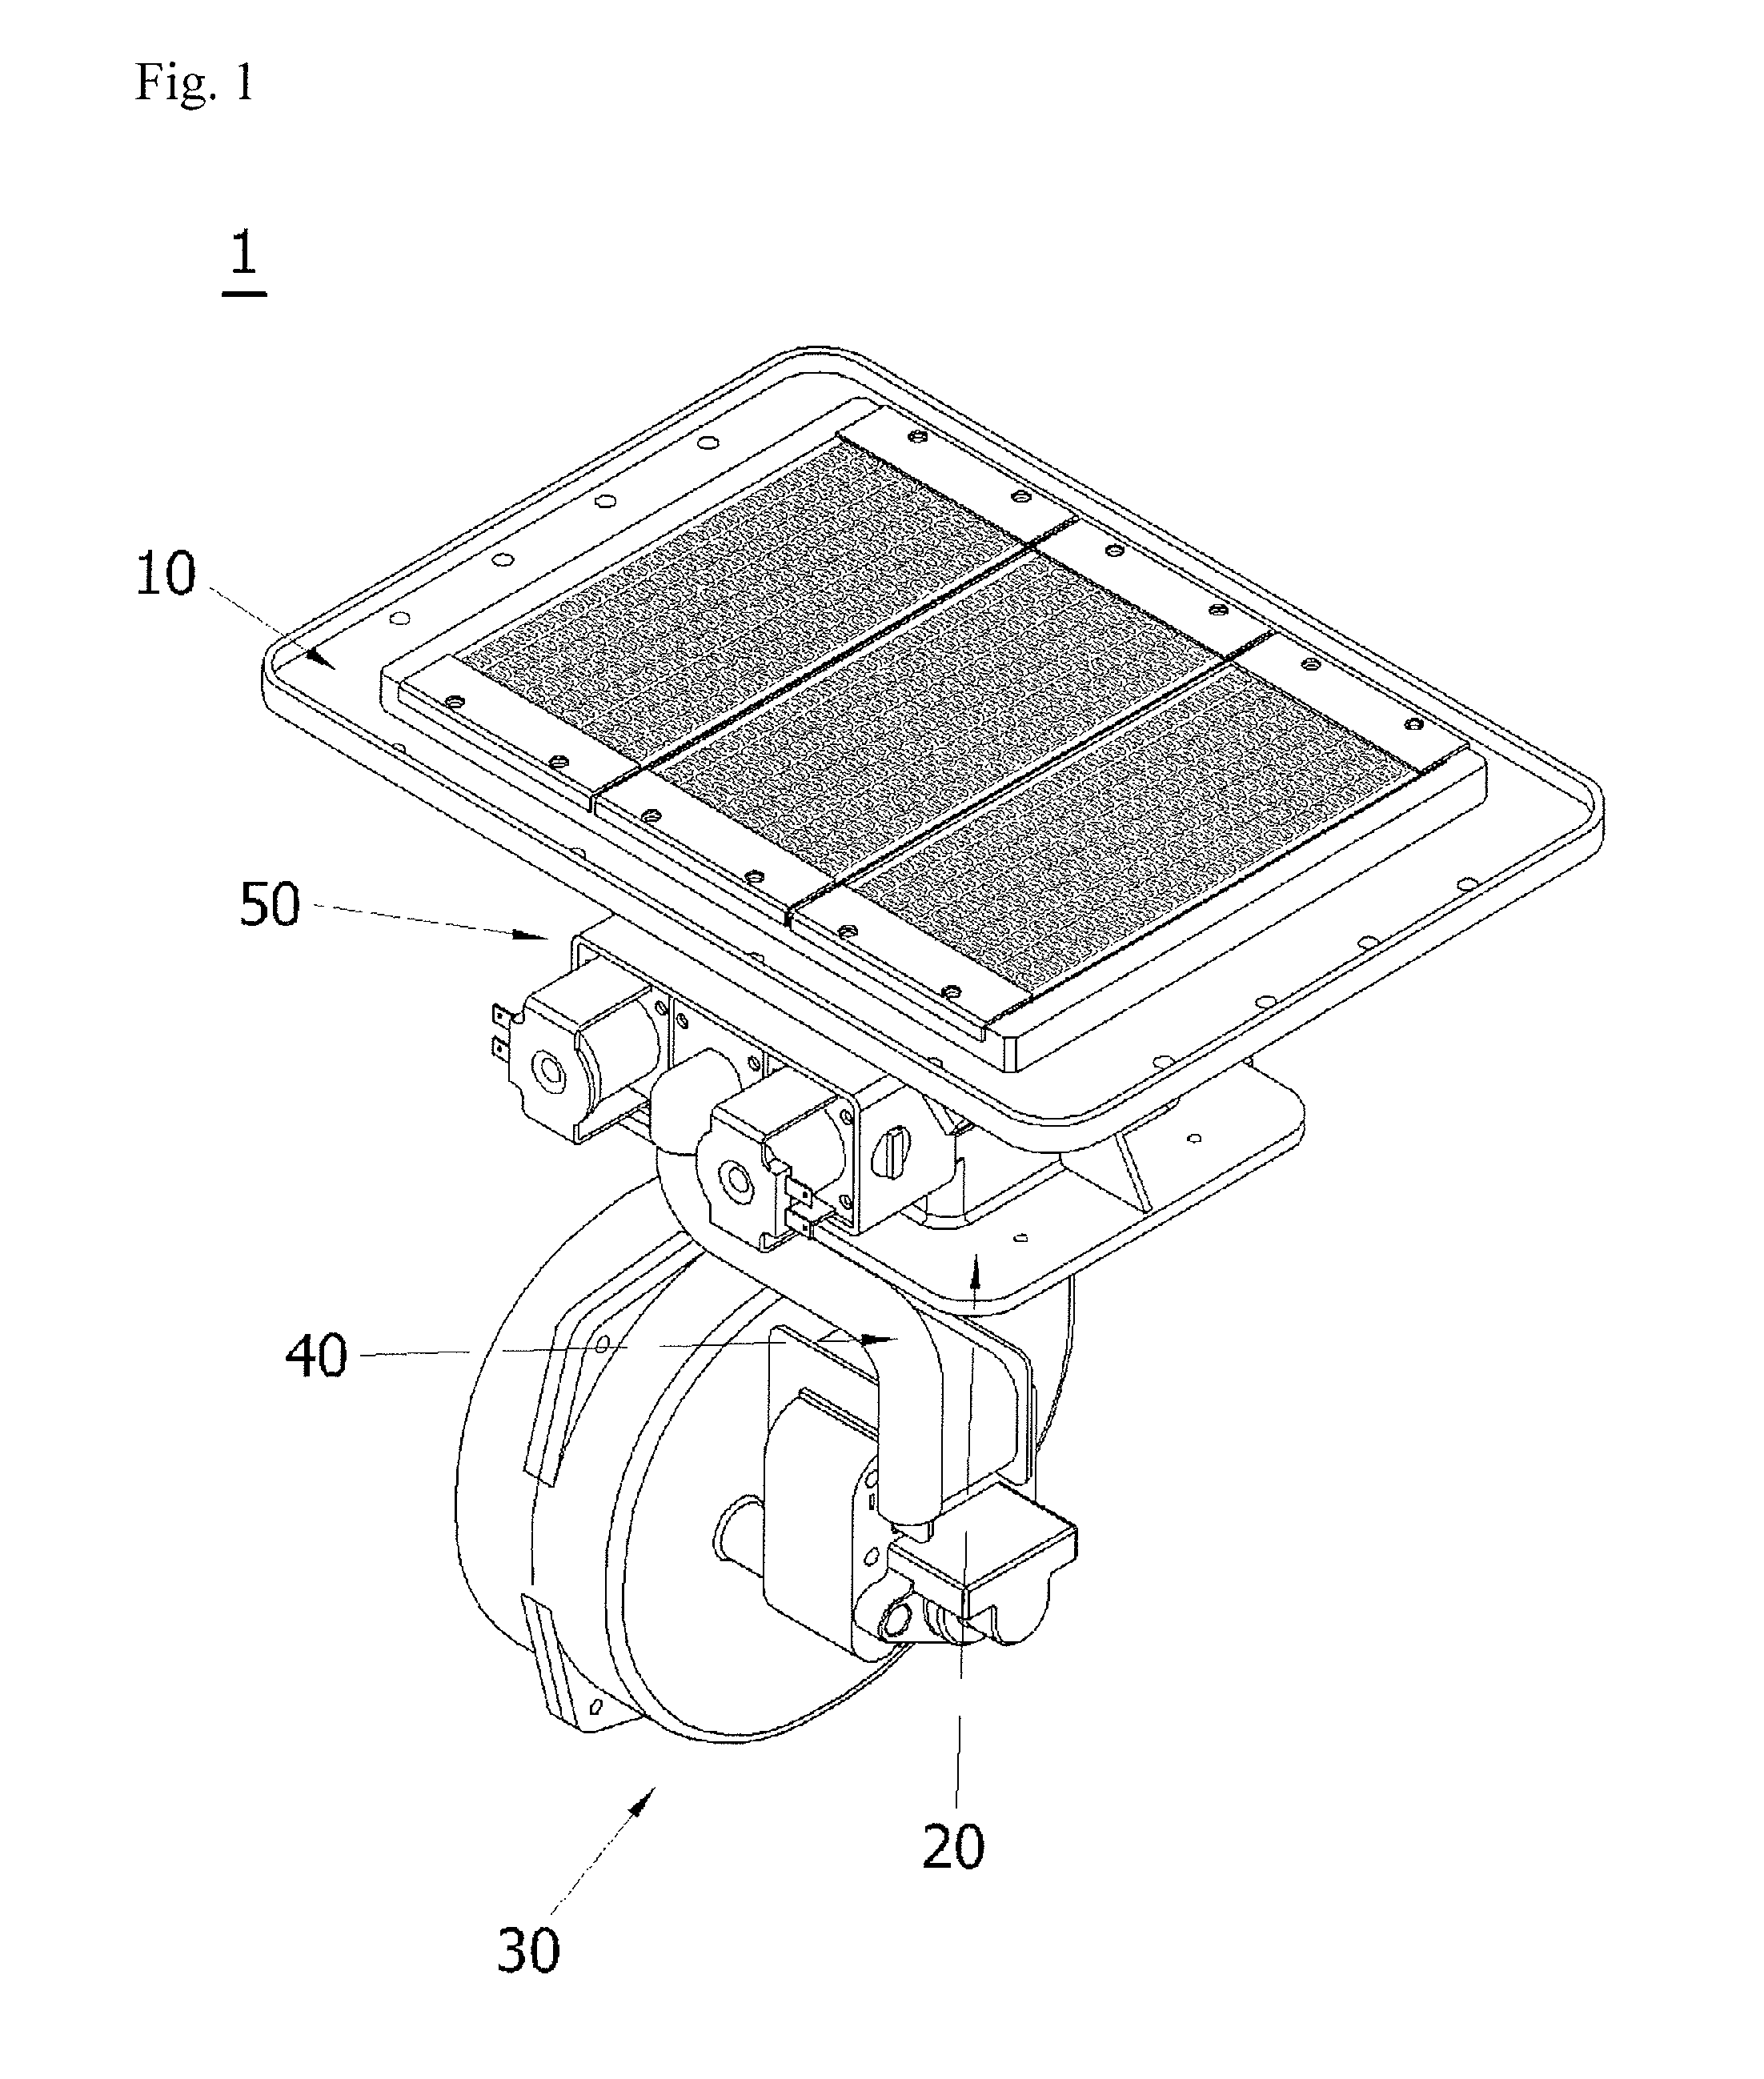 Flame hole unit structure of a gas burner